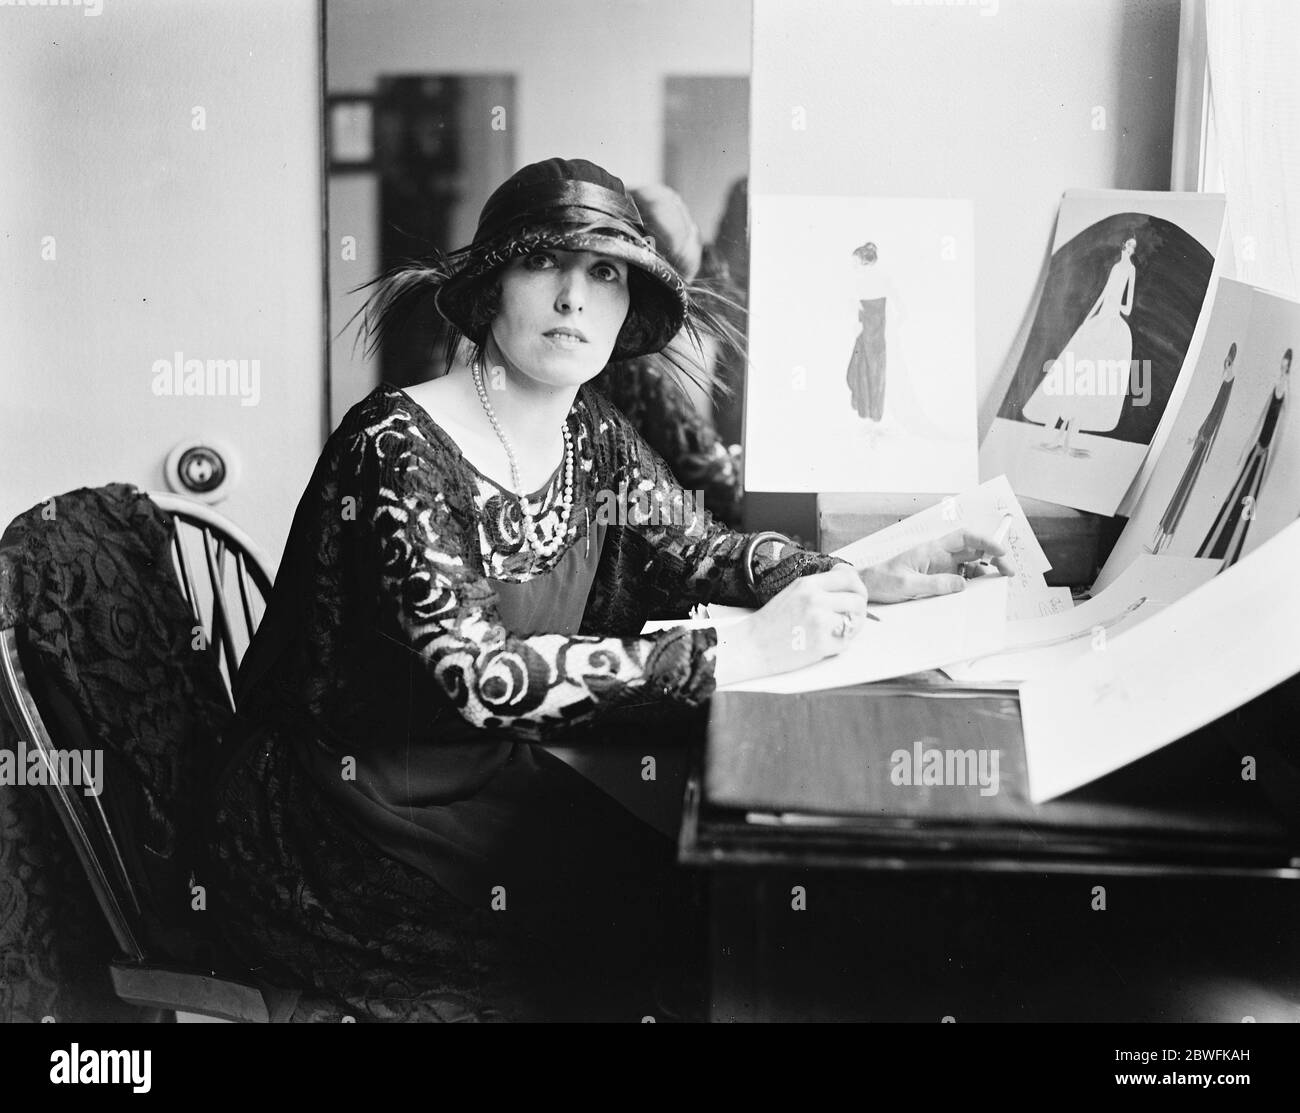 A Princess in Buisness Princess Andrew of Russia has joined a West End firm as a dress designer . The Princess photgraphed at work on some new designs 21 July 1922 Stock Photo